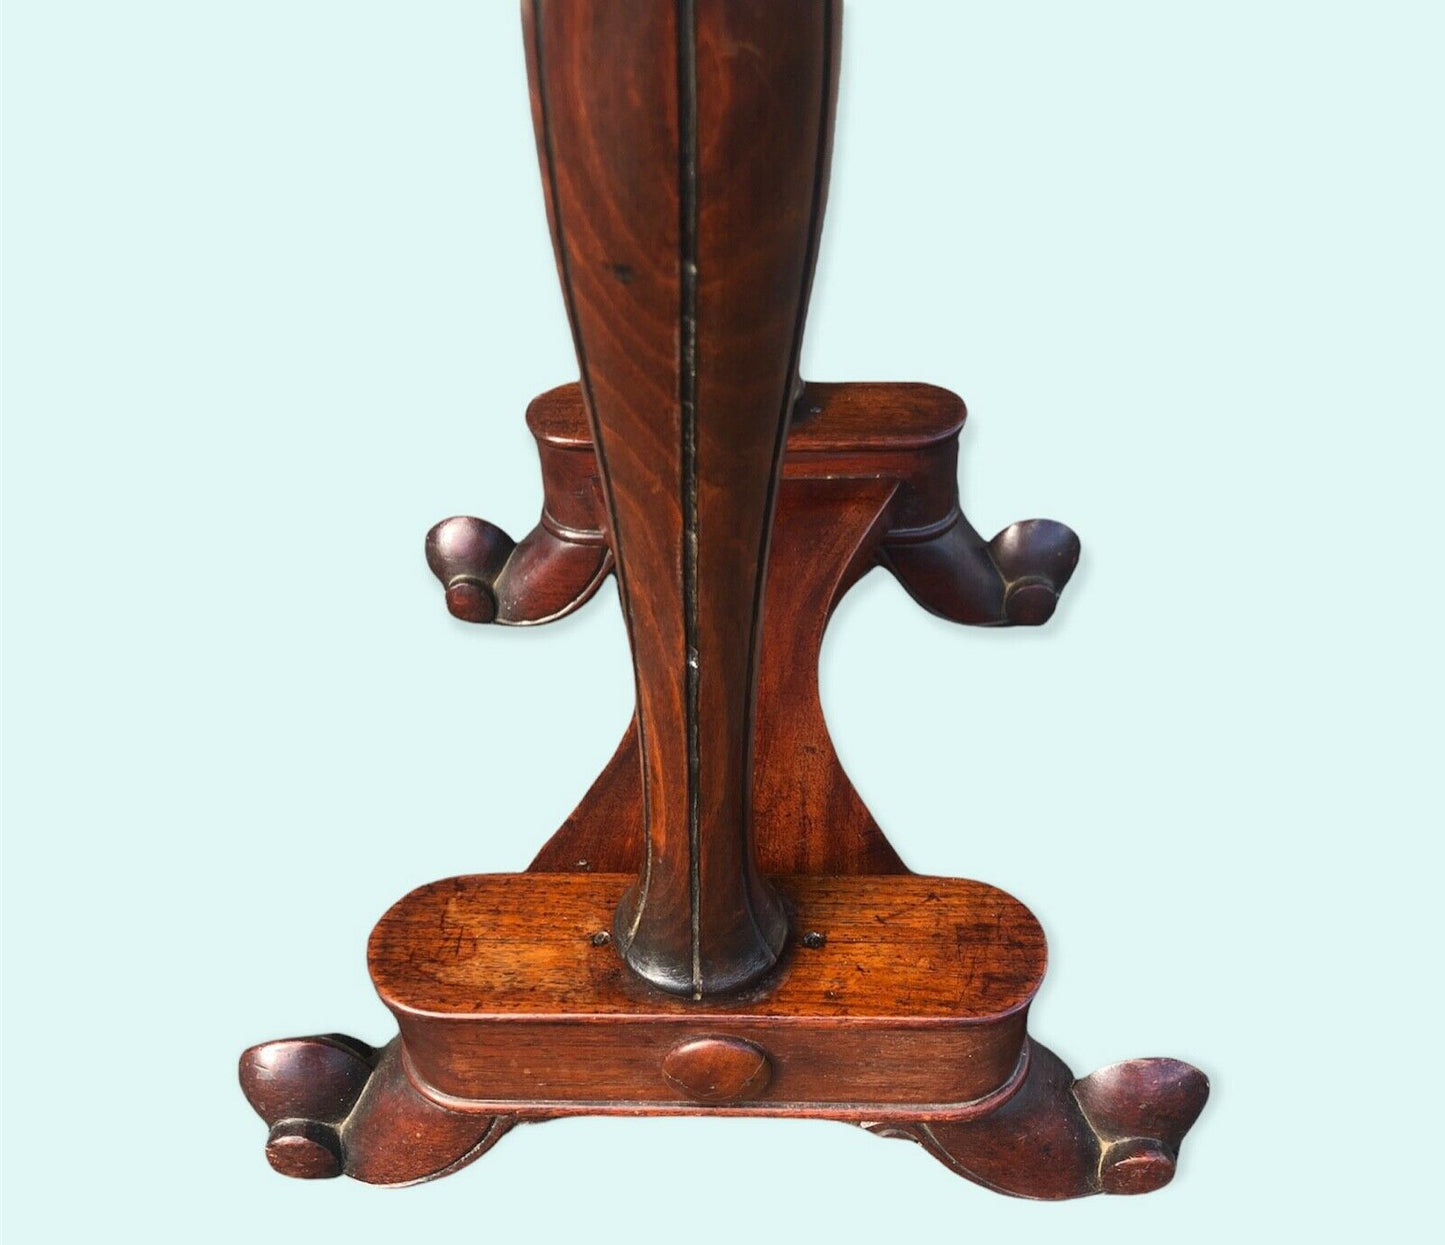 000979.....Antique Mahogany Coffee / Occasional Table